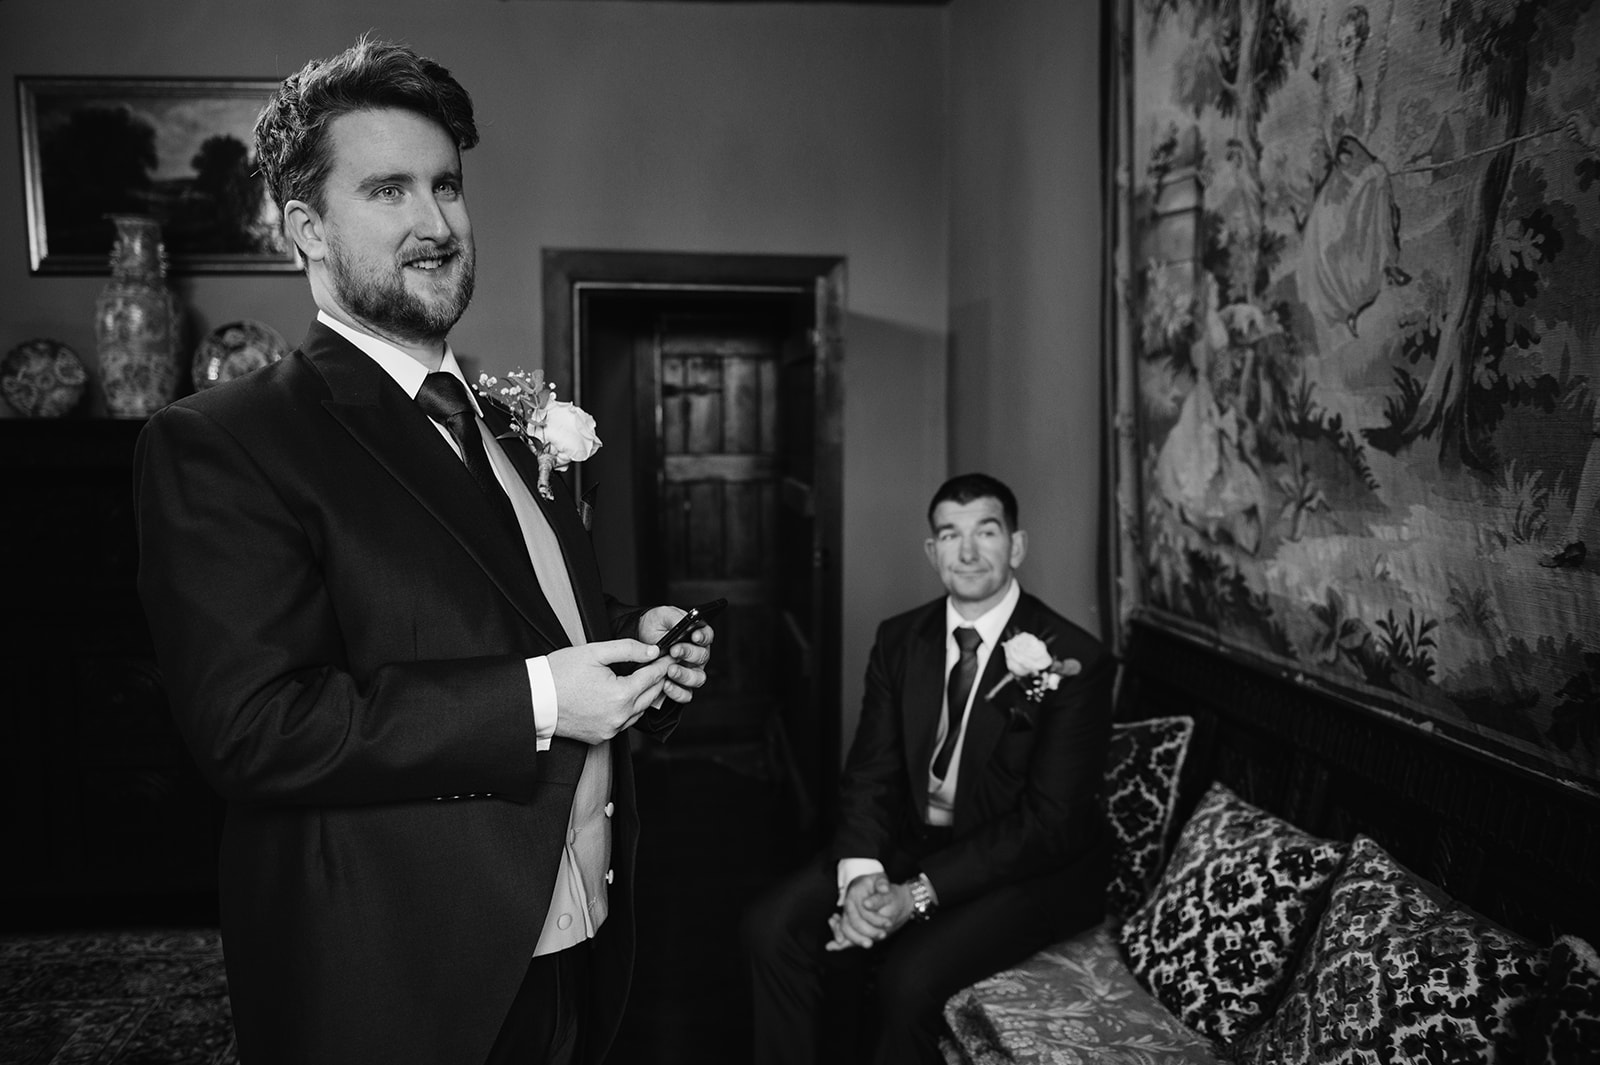 The groom and groomsman waiting in Chenies Manor for the wedding to begin.